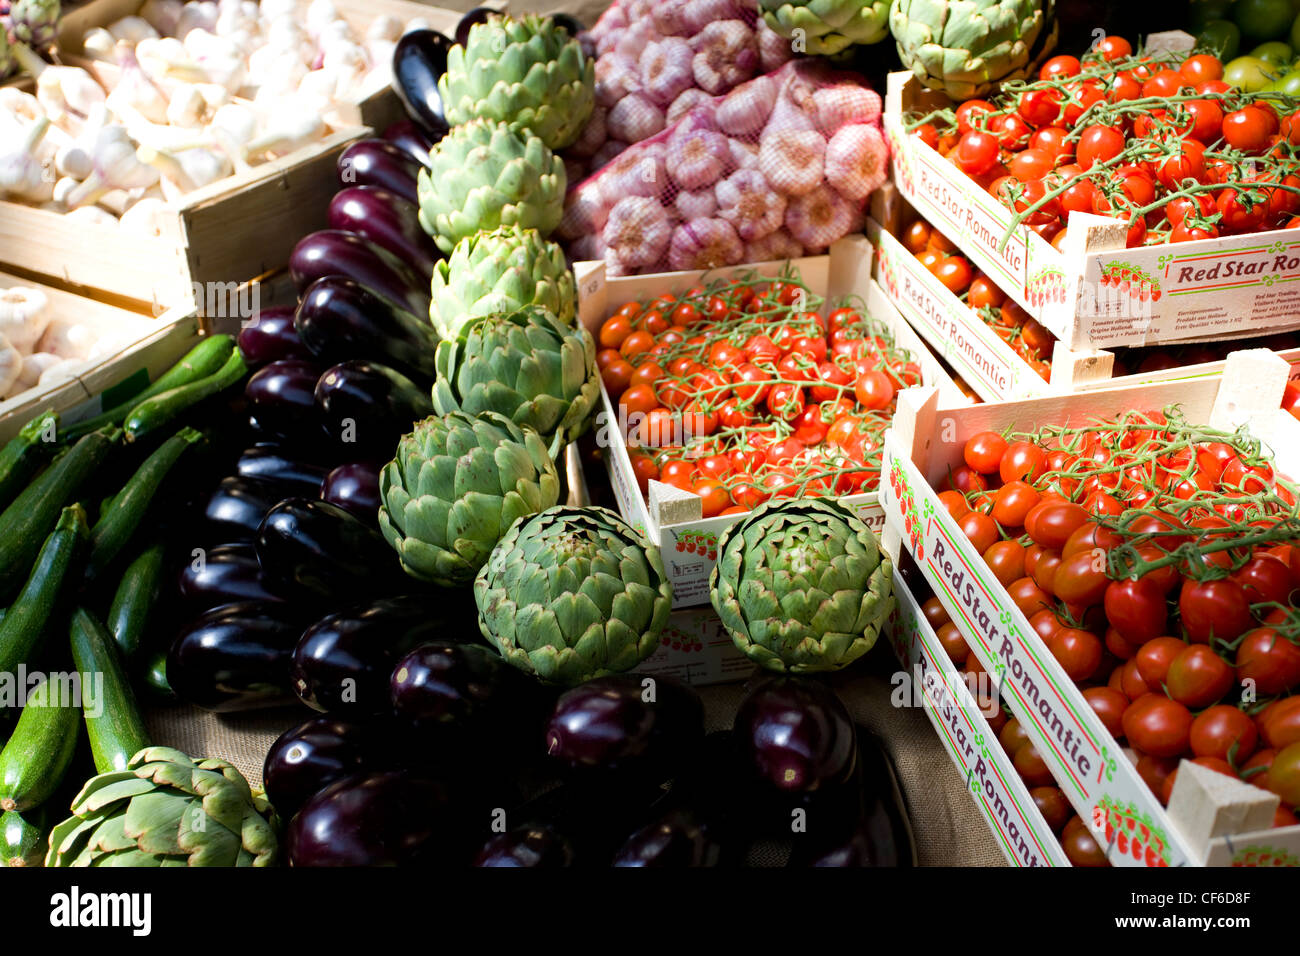 Organic vegetables for sale in a market. Stock Photo